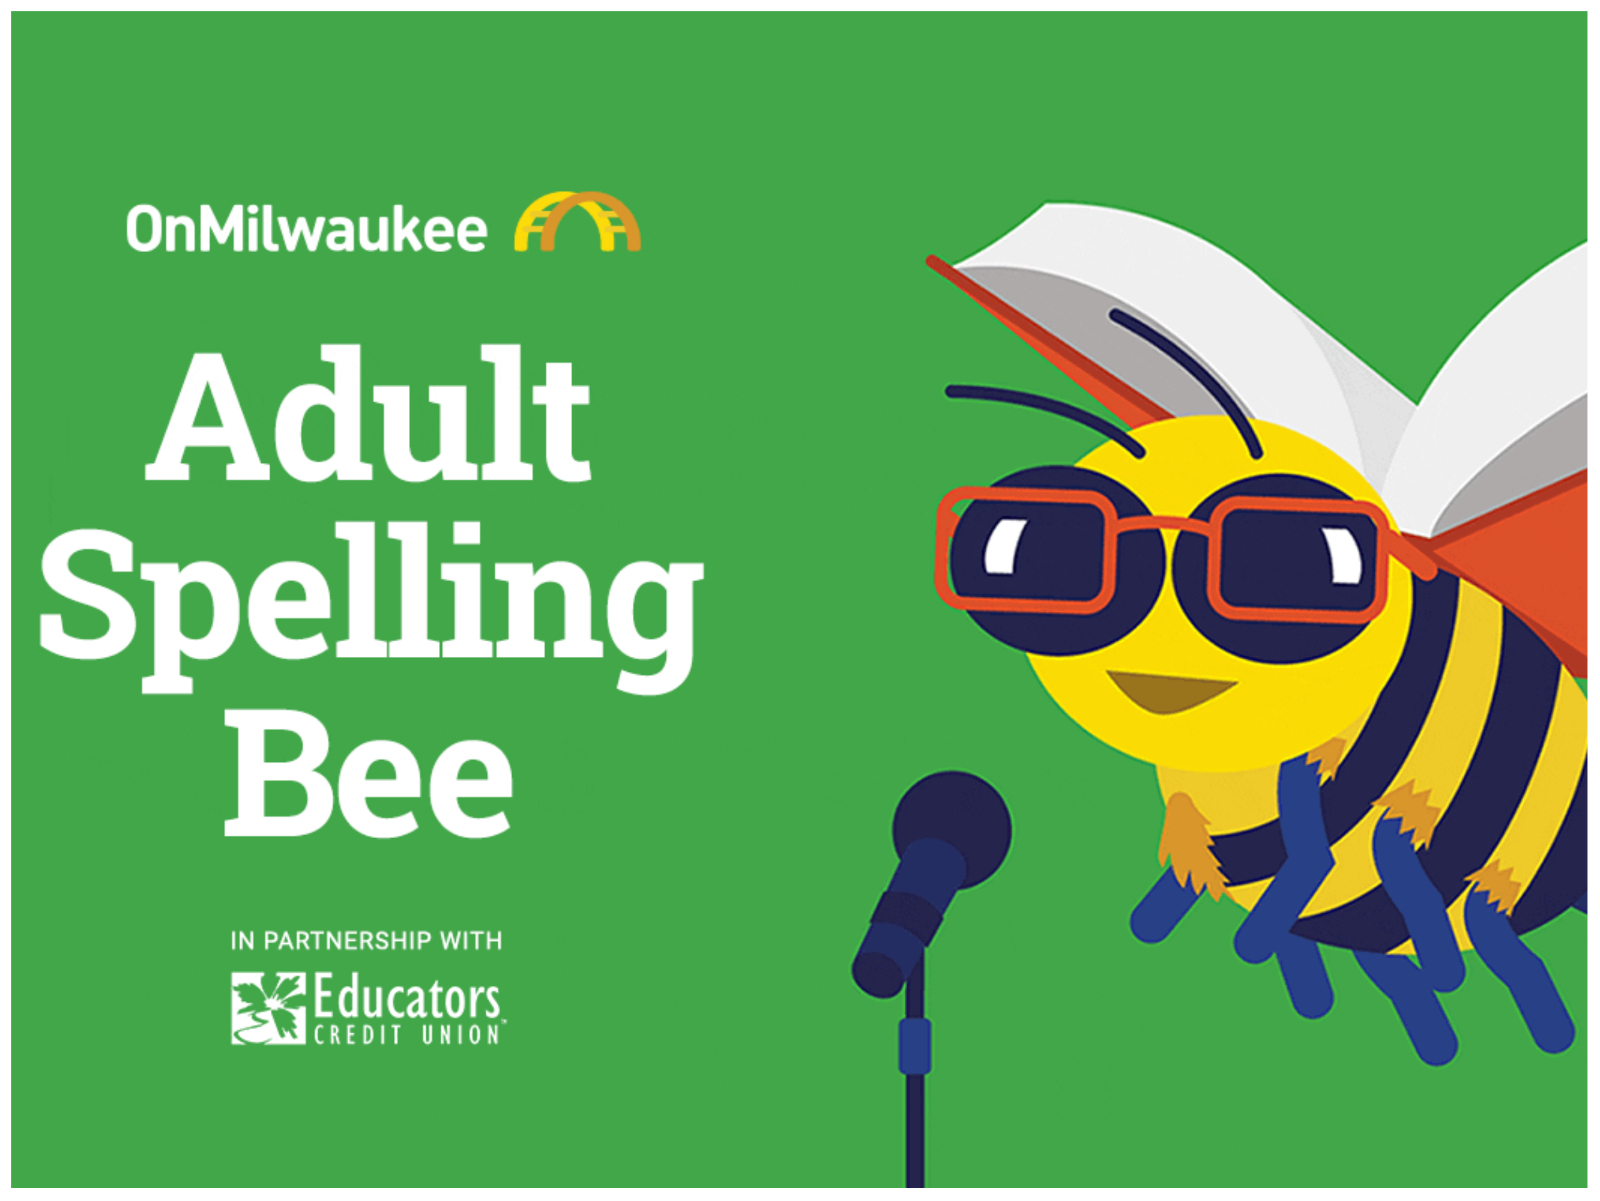 Get your tickets for adult spelling bee